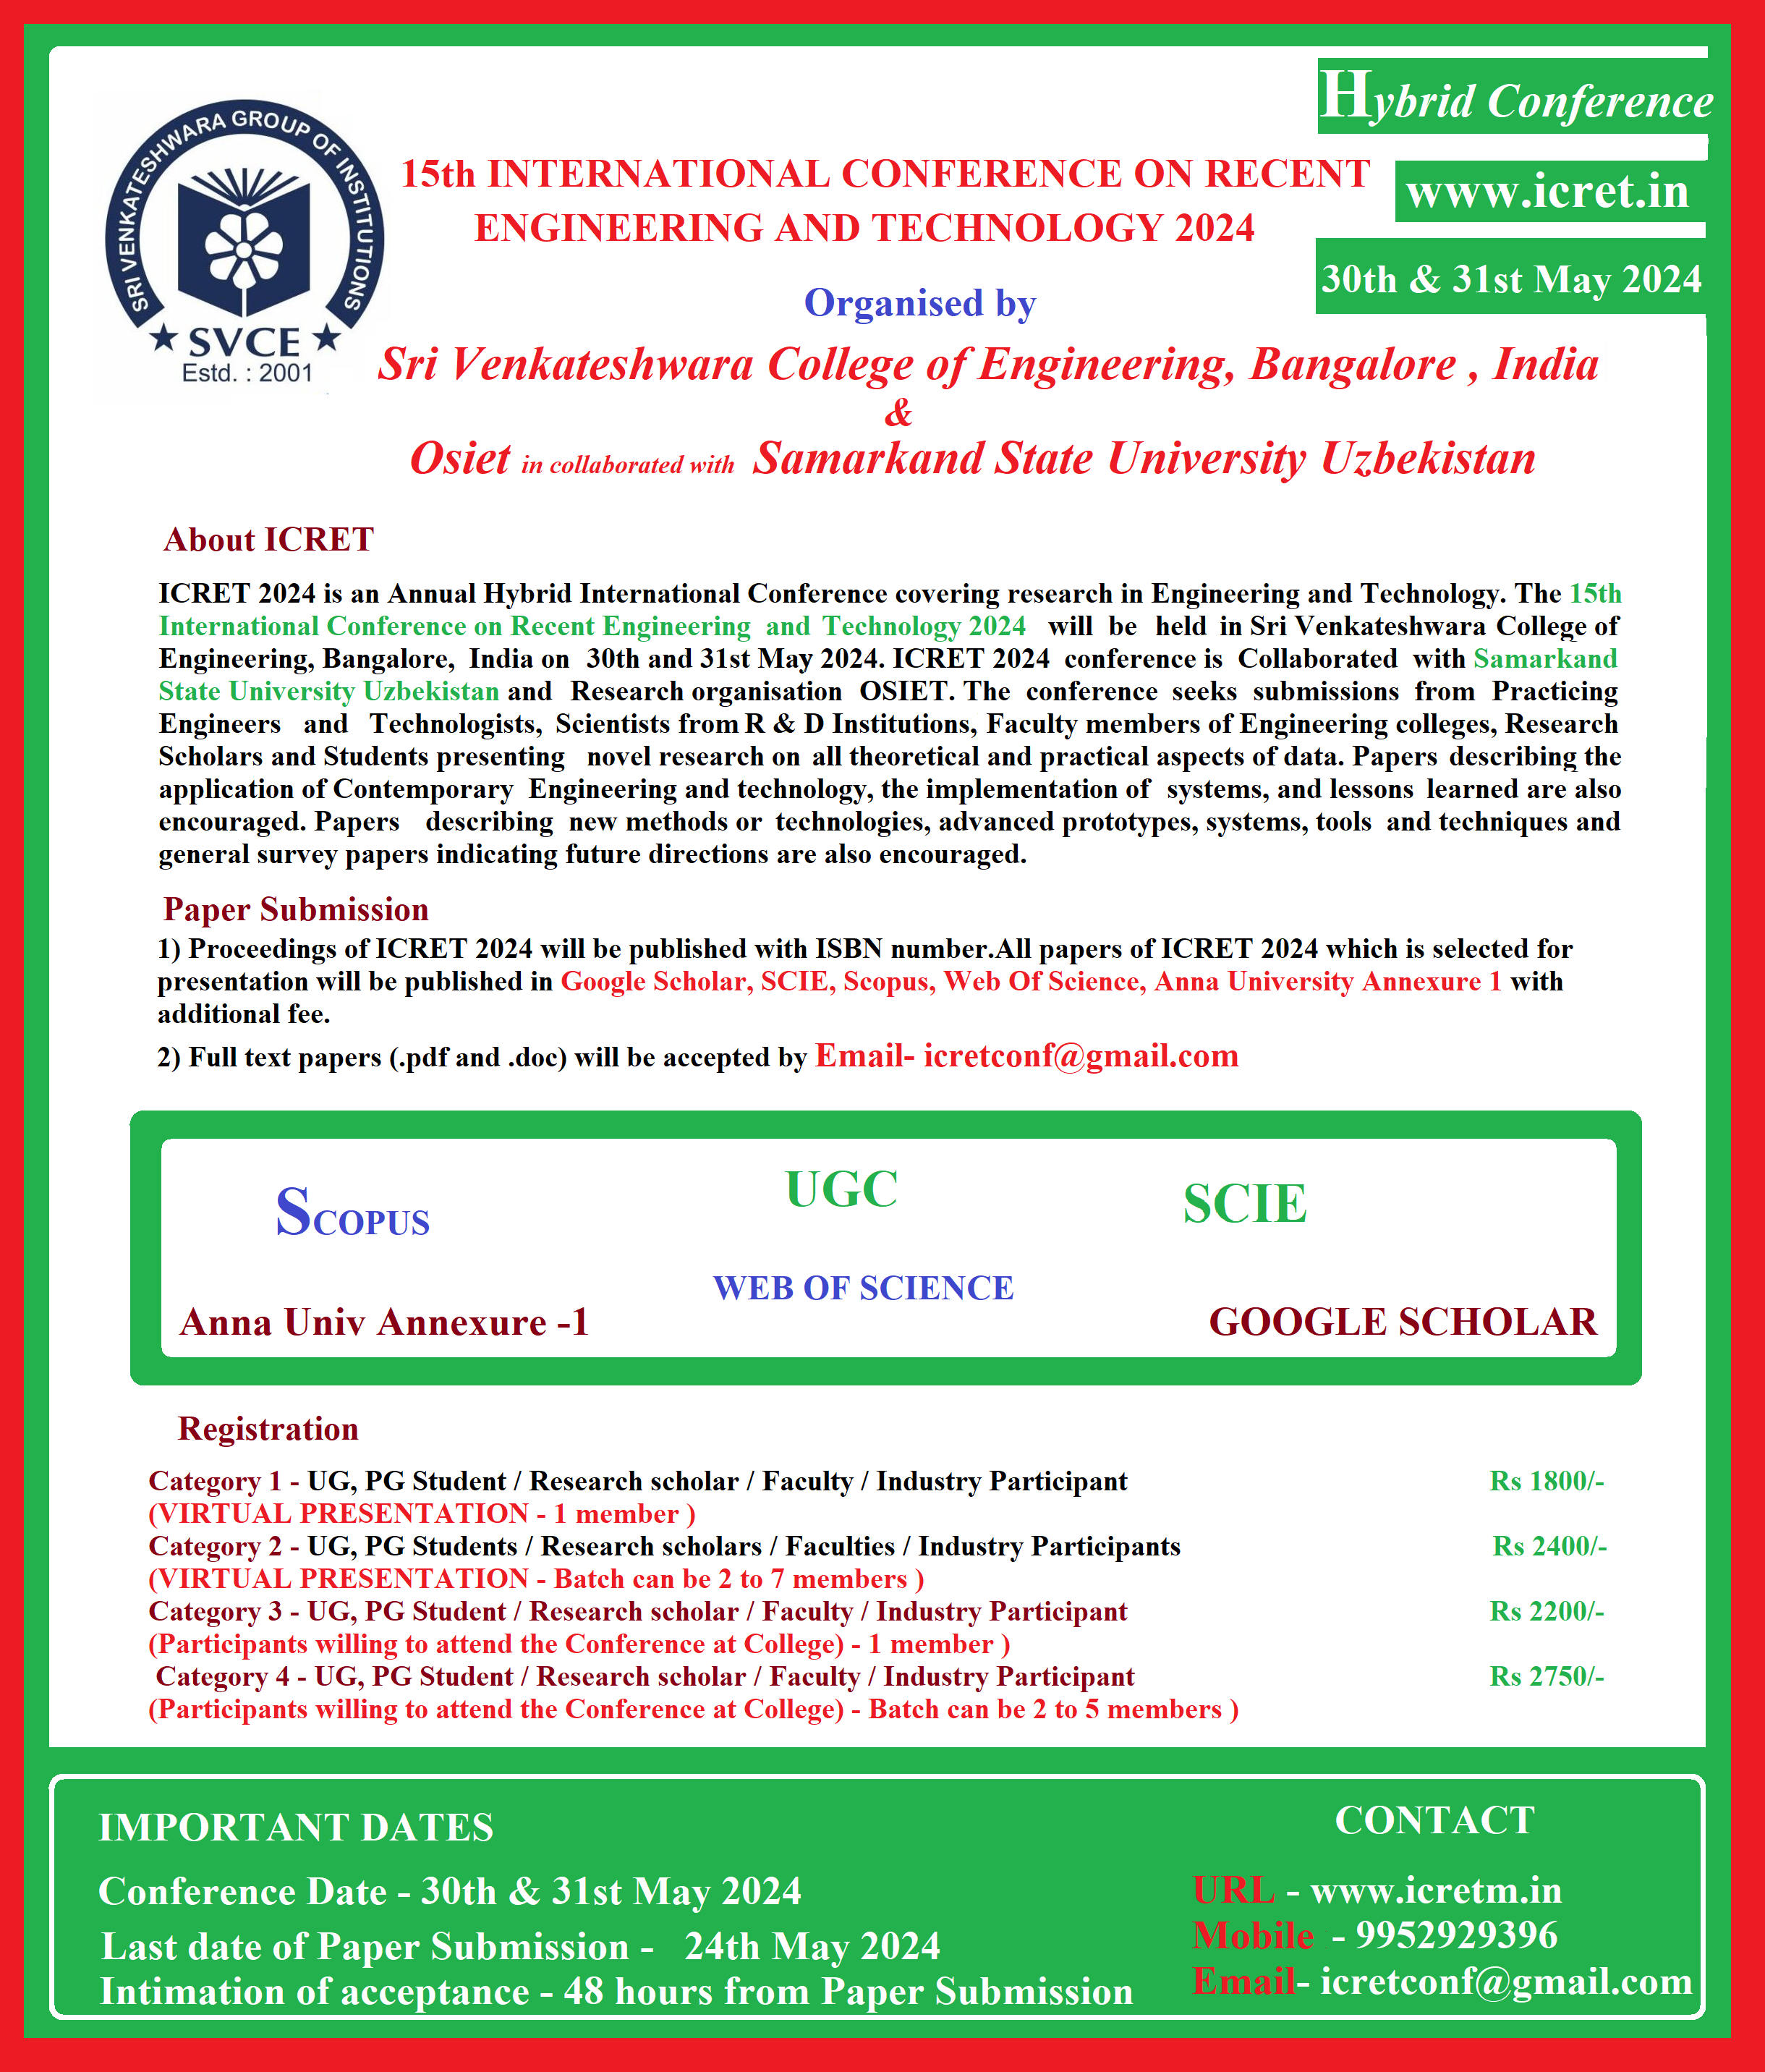 15th International Conference on Recent Engineering and Technology ICRET 2024